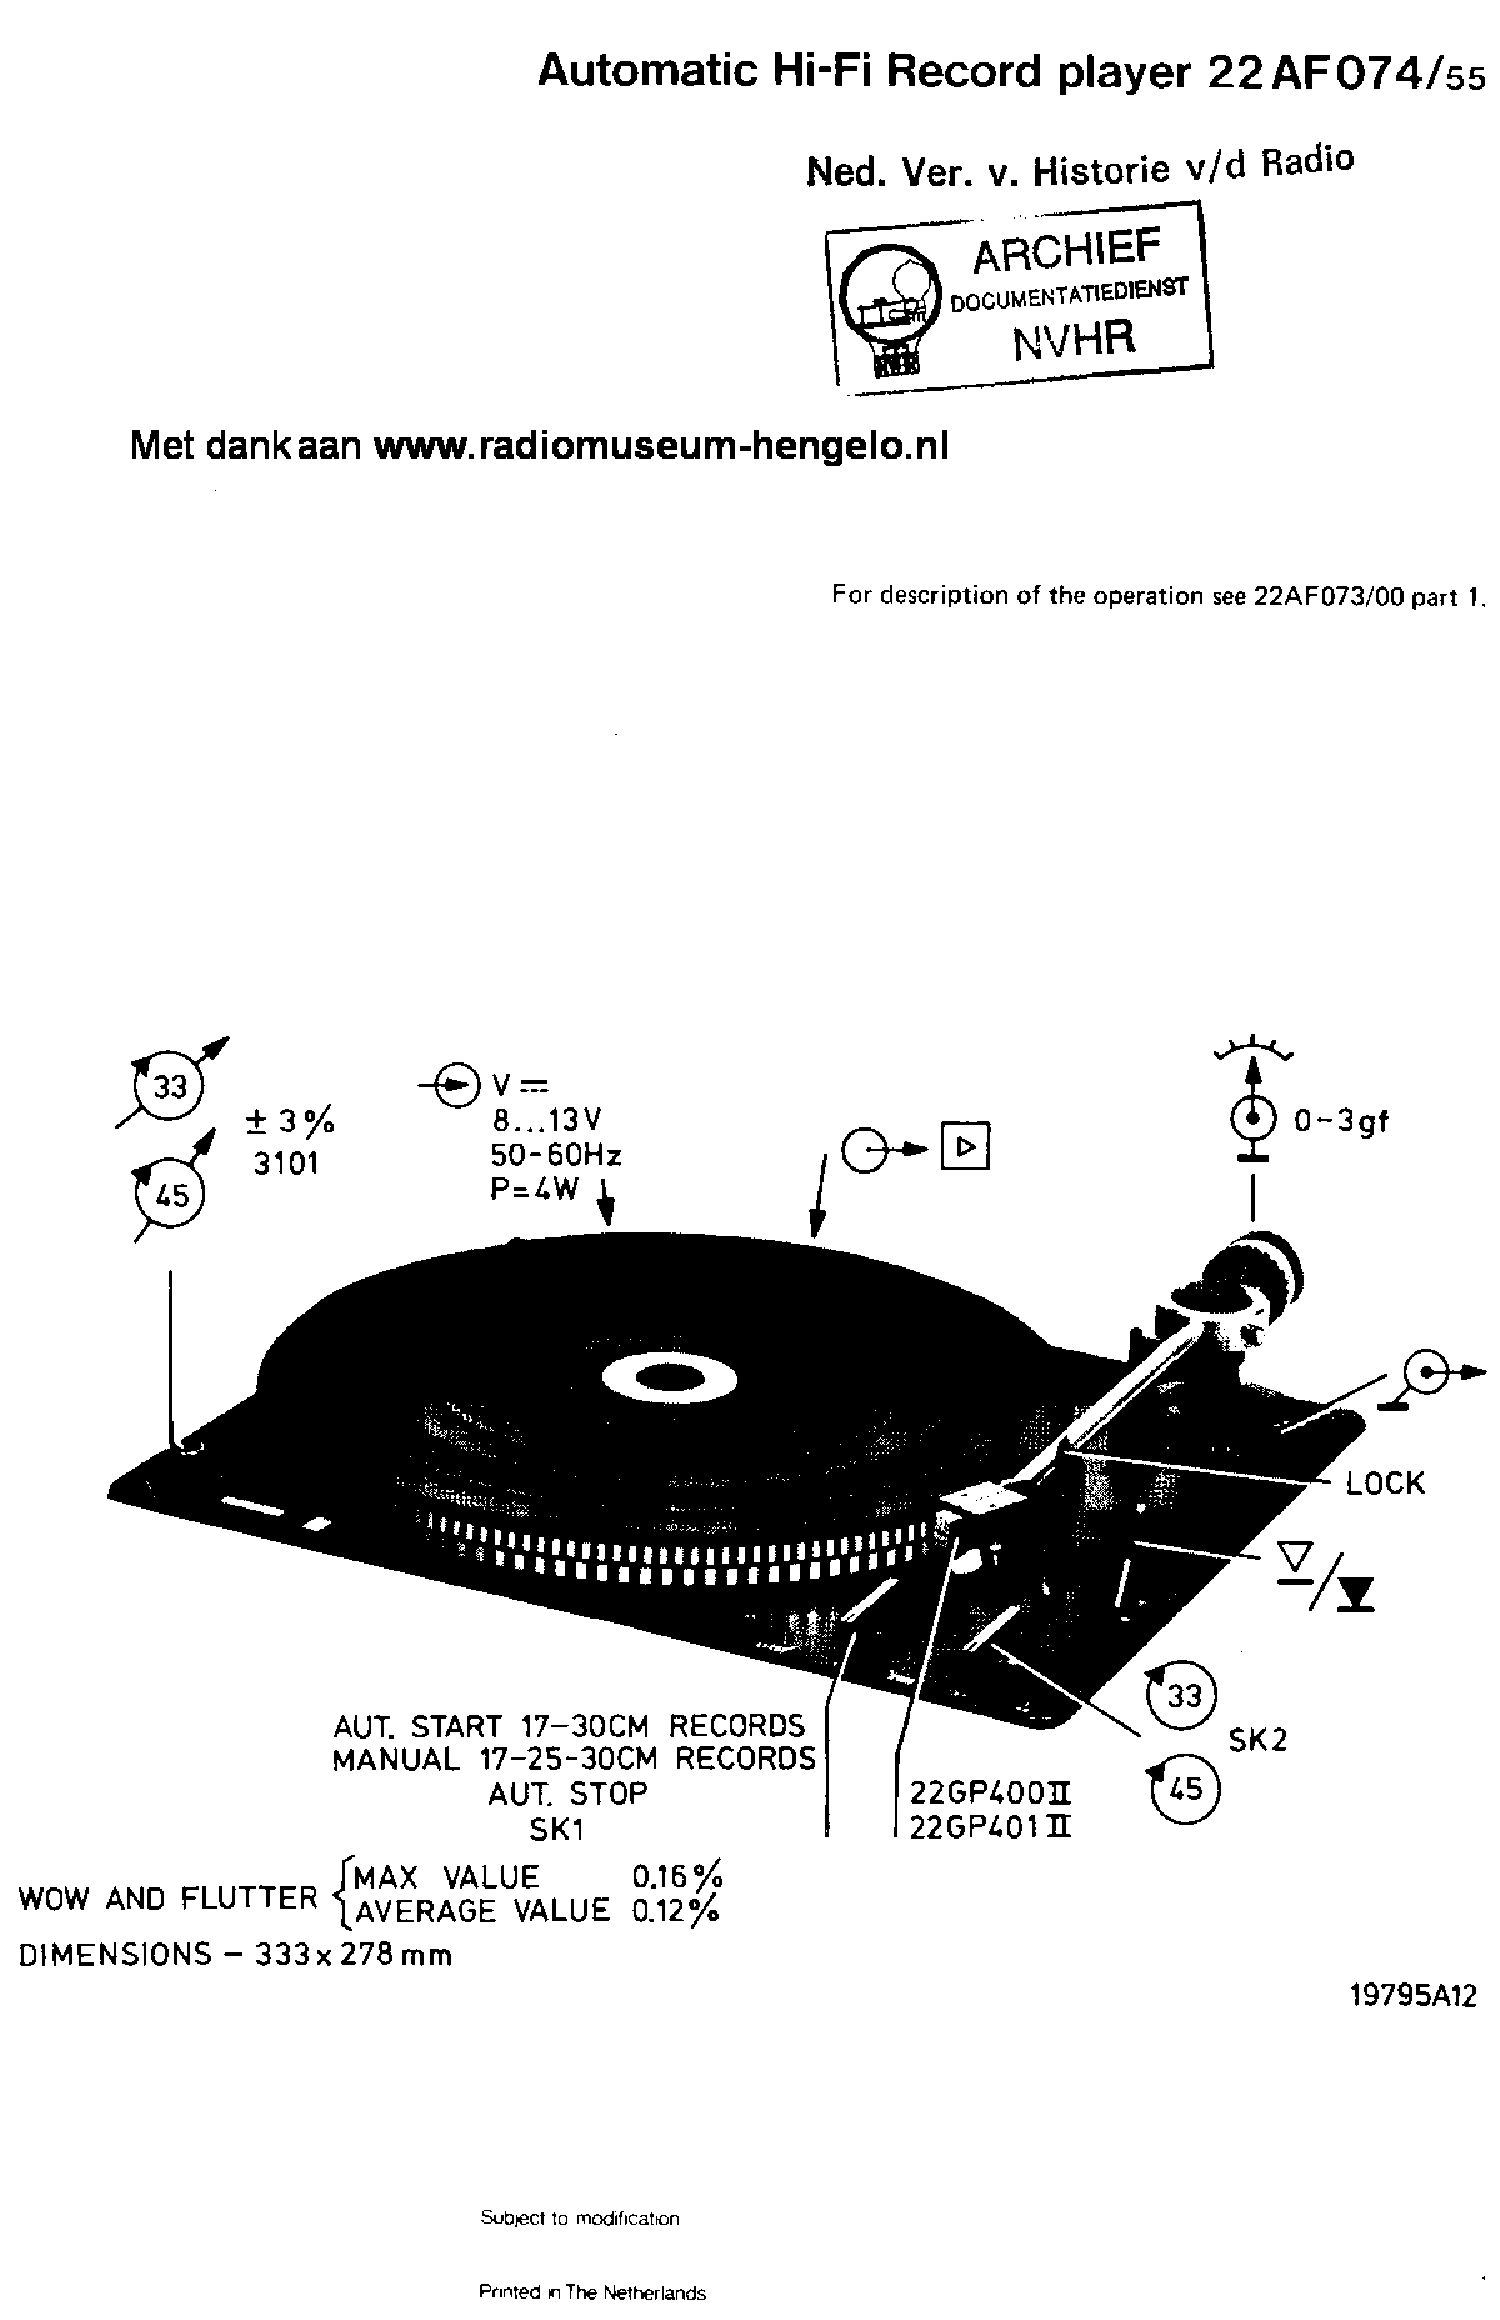 PHILIPS 22AF074-55 AUTOMATIC HIFI RECORD PLAYER SM service manual (1st page)